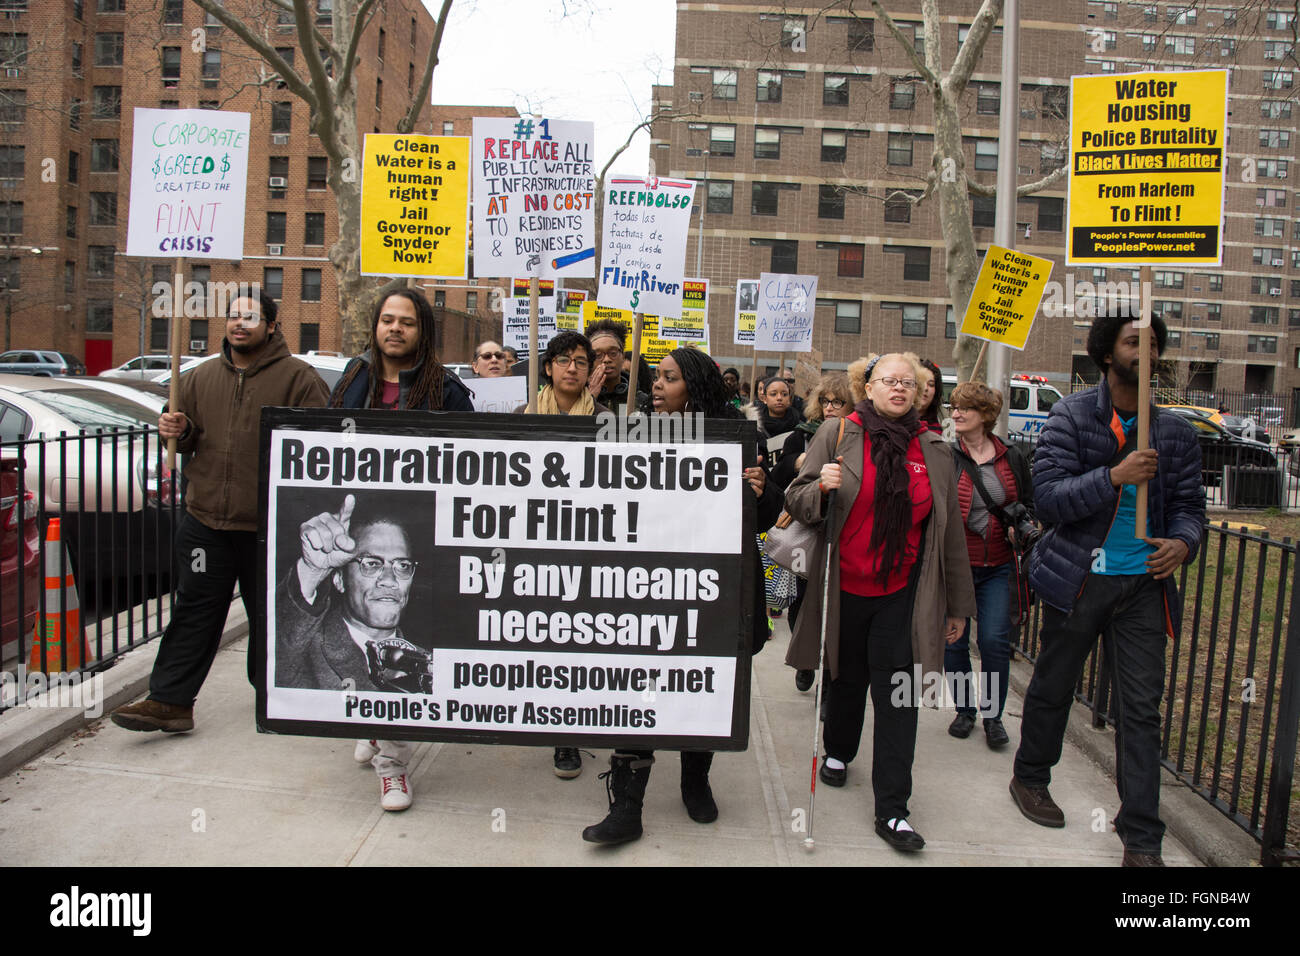 Harlem, New York, USA. 21st February 2016. Social and environmental justice activists march through Harlem after a solidarity rally for Flint, Michigan at the Adam Clayton Powell Jr. State Office Building on the 51st anniversary of the assassination of Malcolm X. Stock Photo